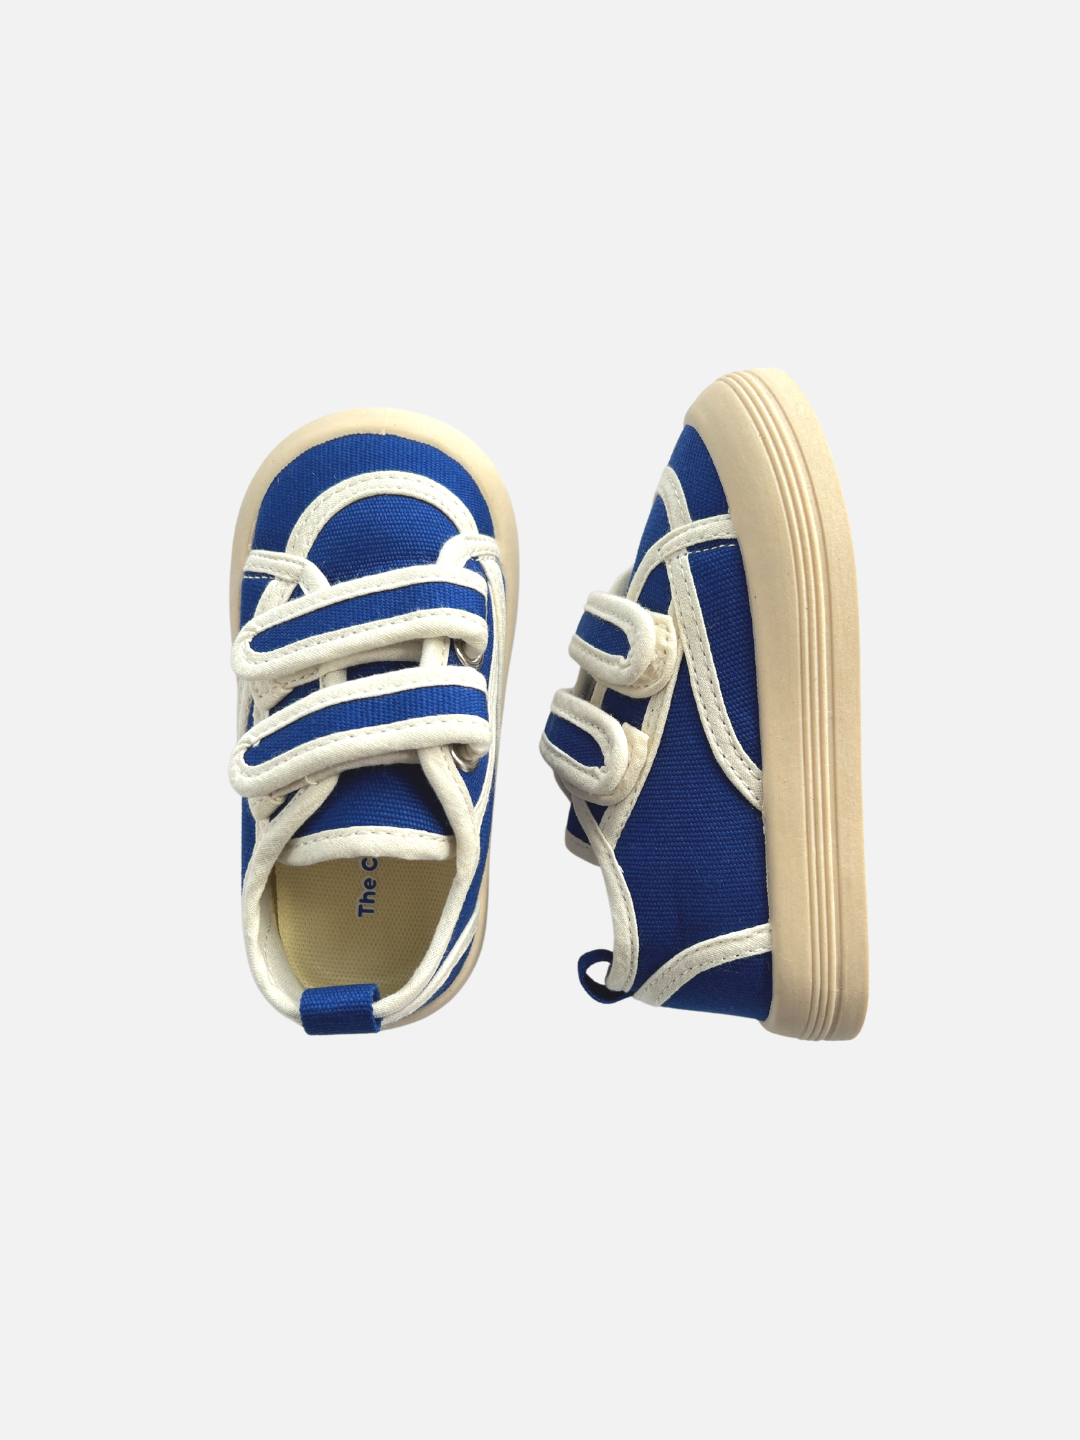 Pair of kids' sneakers in blue with white trim, top and side views